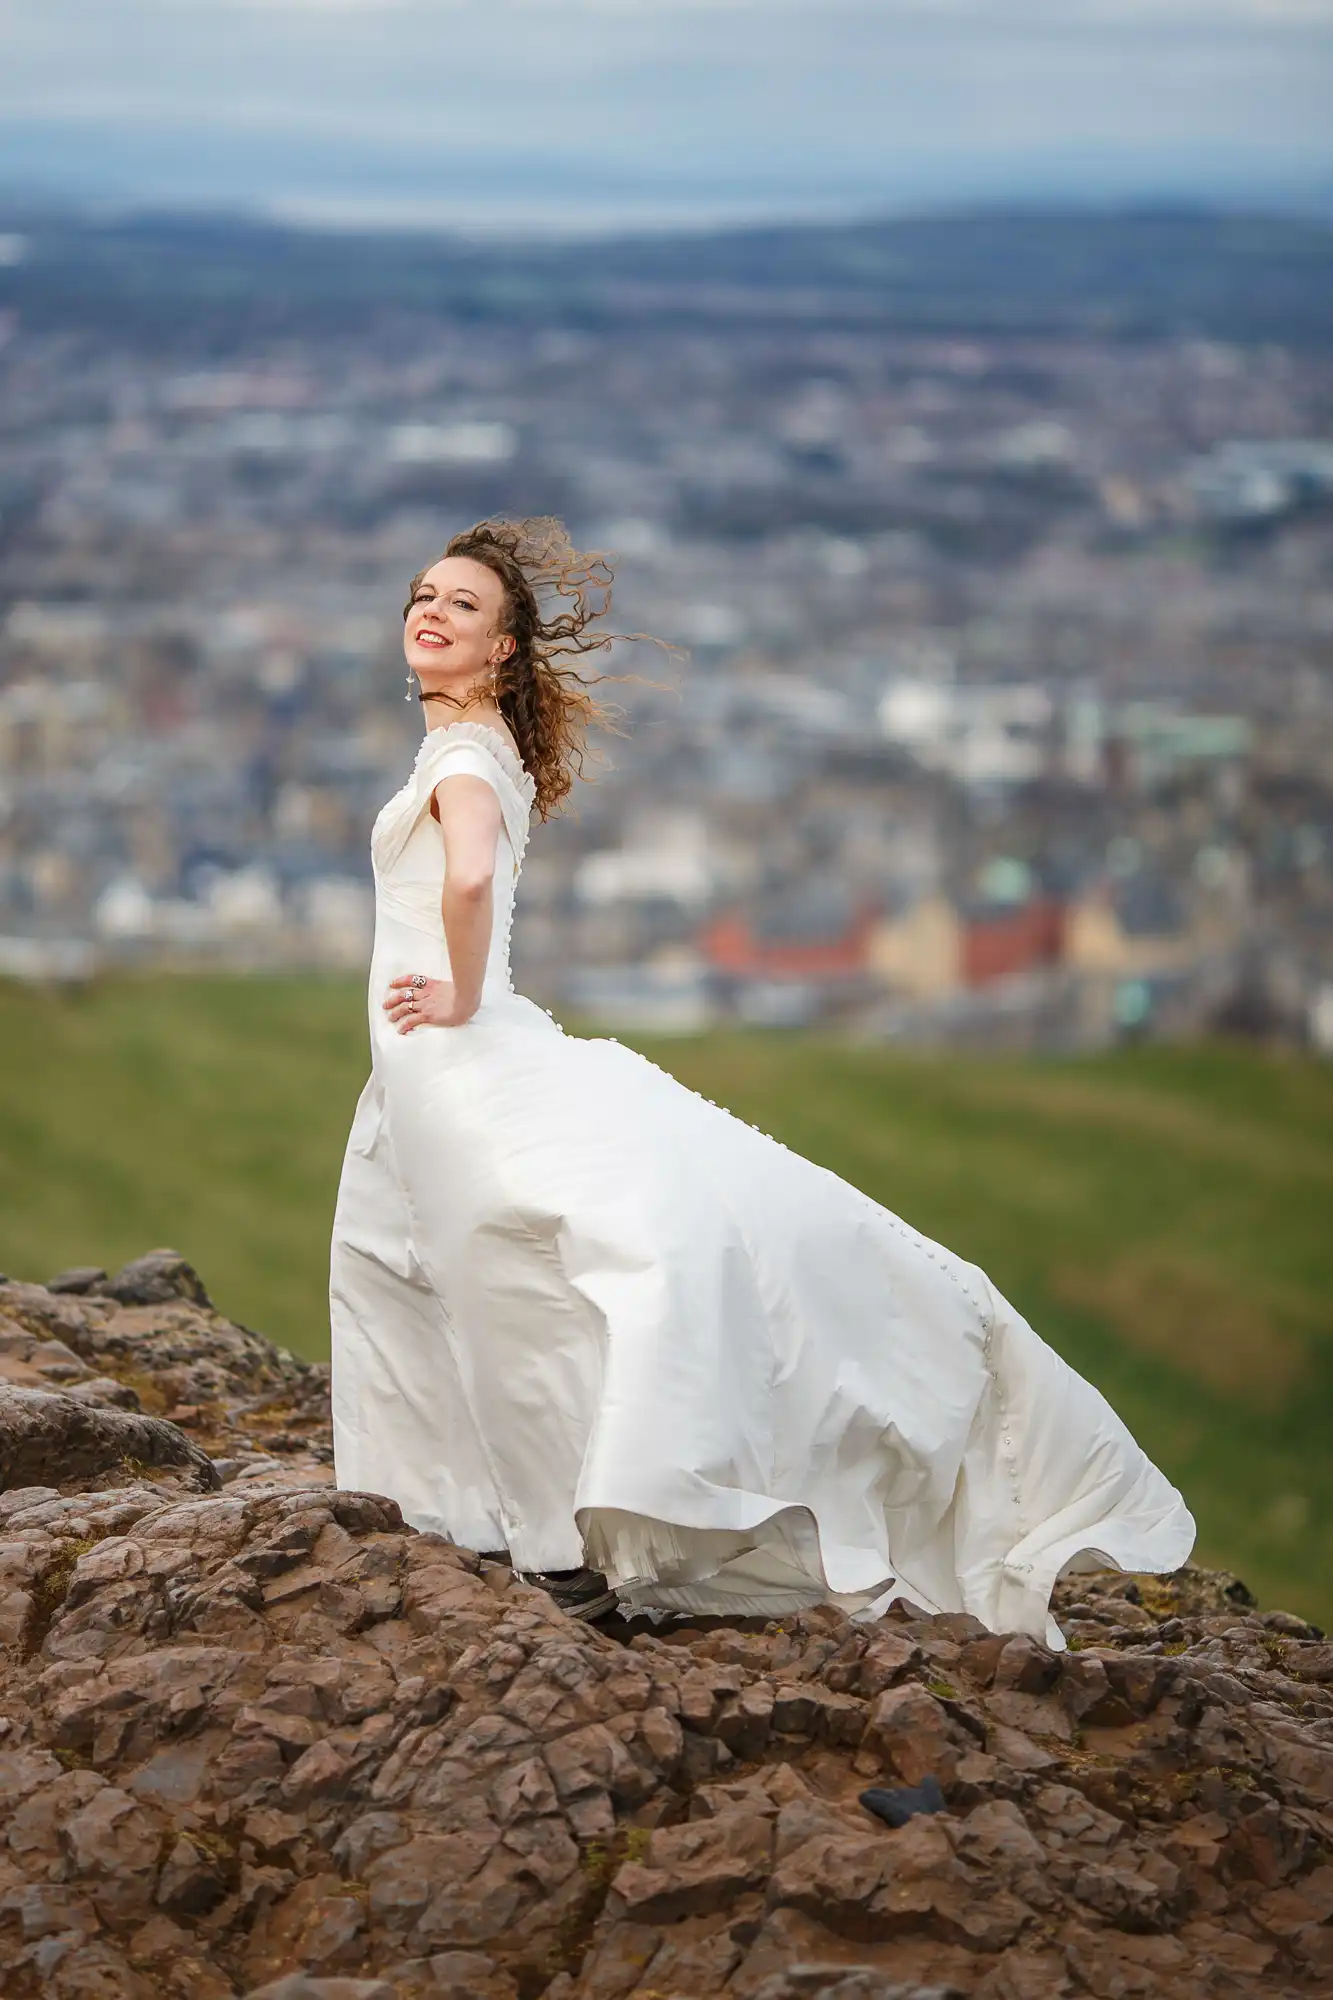 A joyful bride in a white dress stands on a rocky hilltop, her hair blowing in the wind, with a panoramic view of a cityscape in the background.